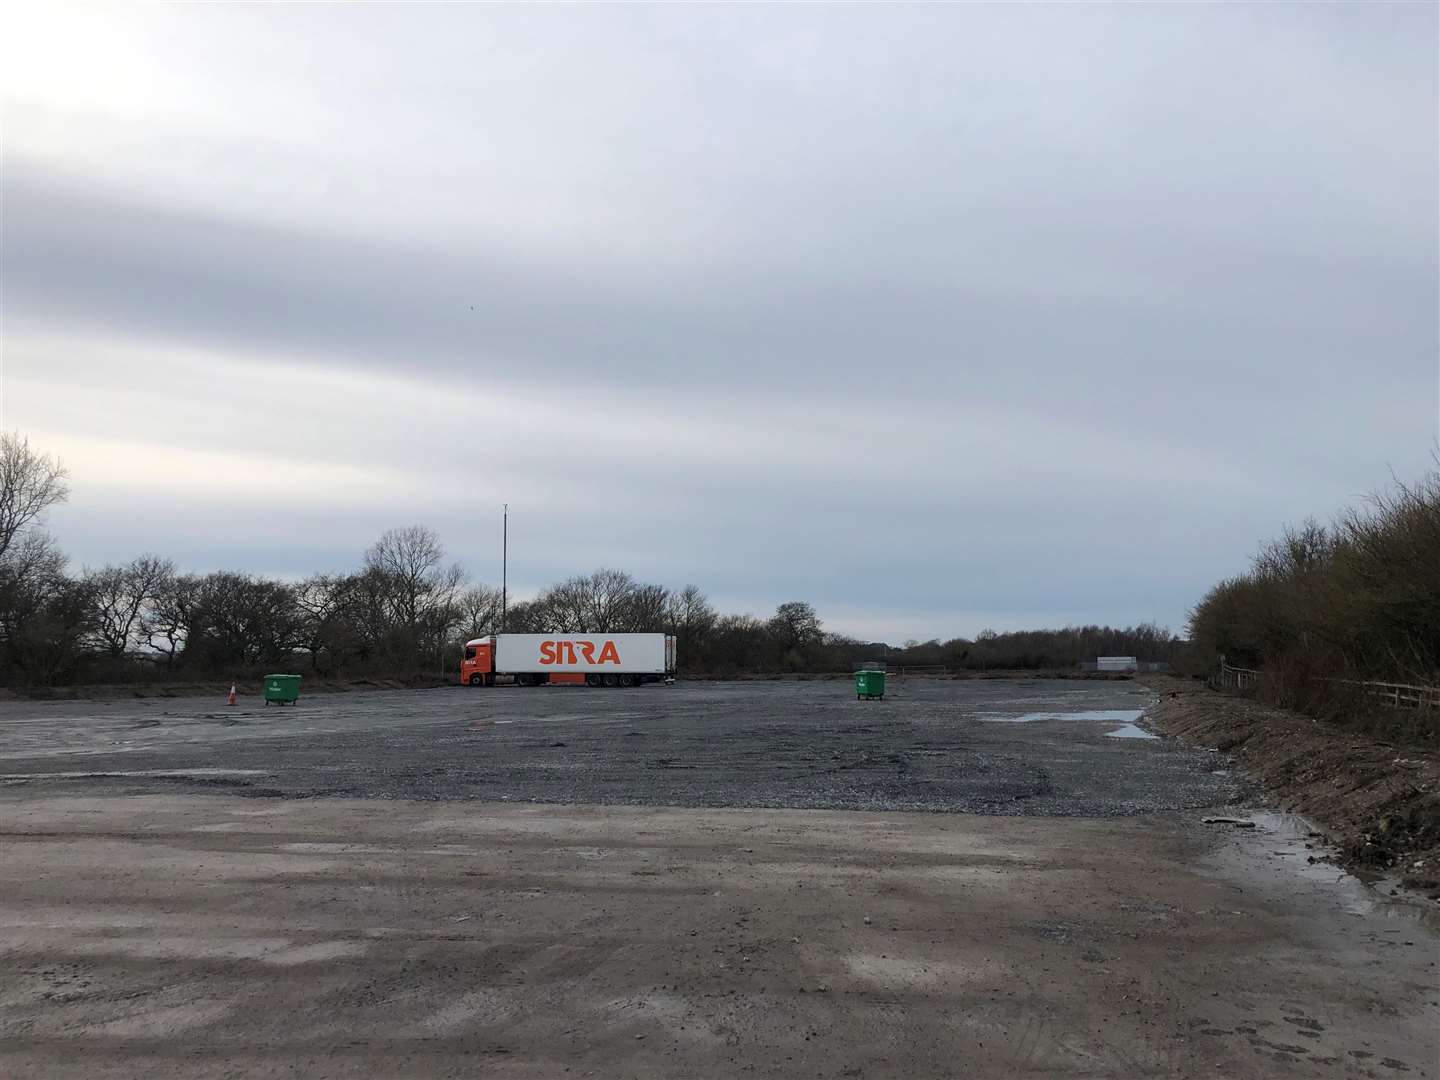 A new, 120 space truck stop will be created as part of the scheme